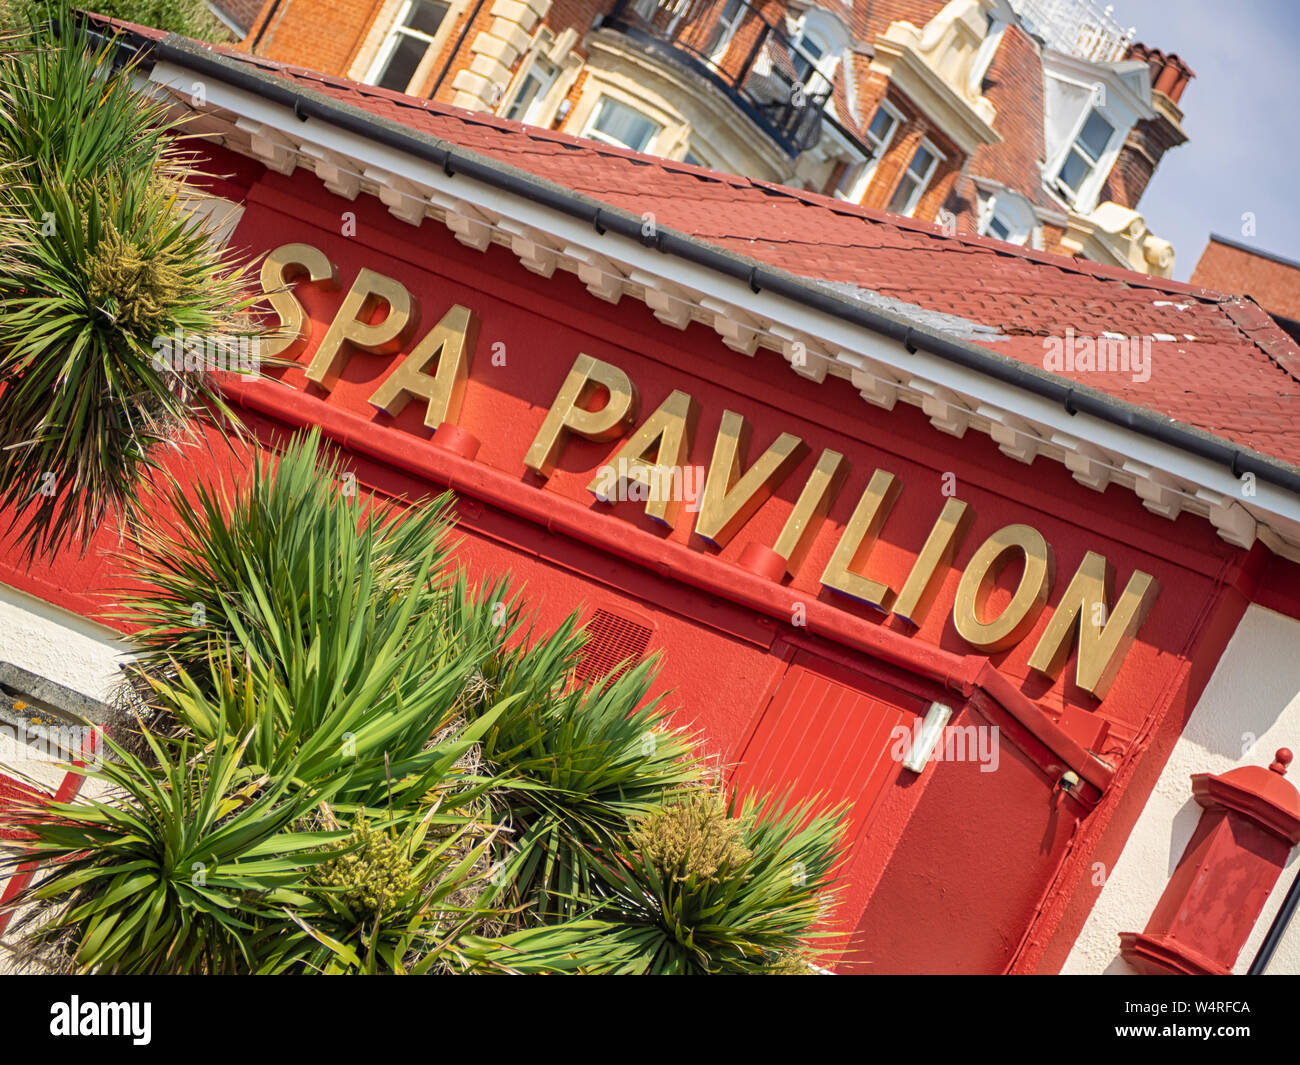 FELIXSTOWE, ESSEX, UK - JULY 18, 2018:  The Spa Pavilion Theatre on the Seafront Stock Photo